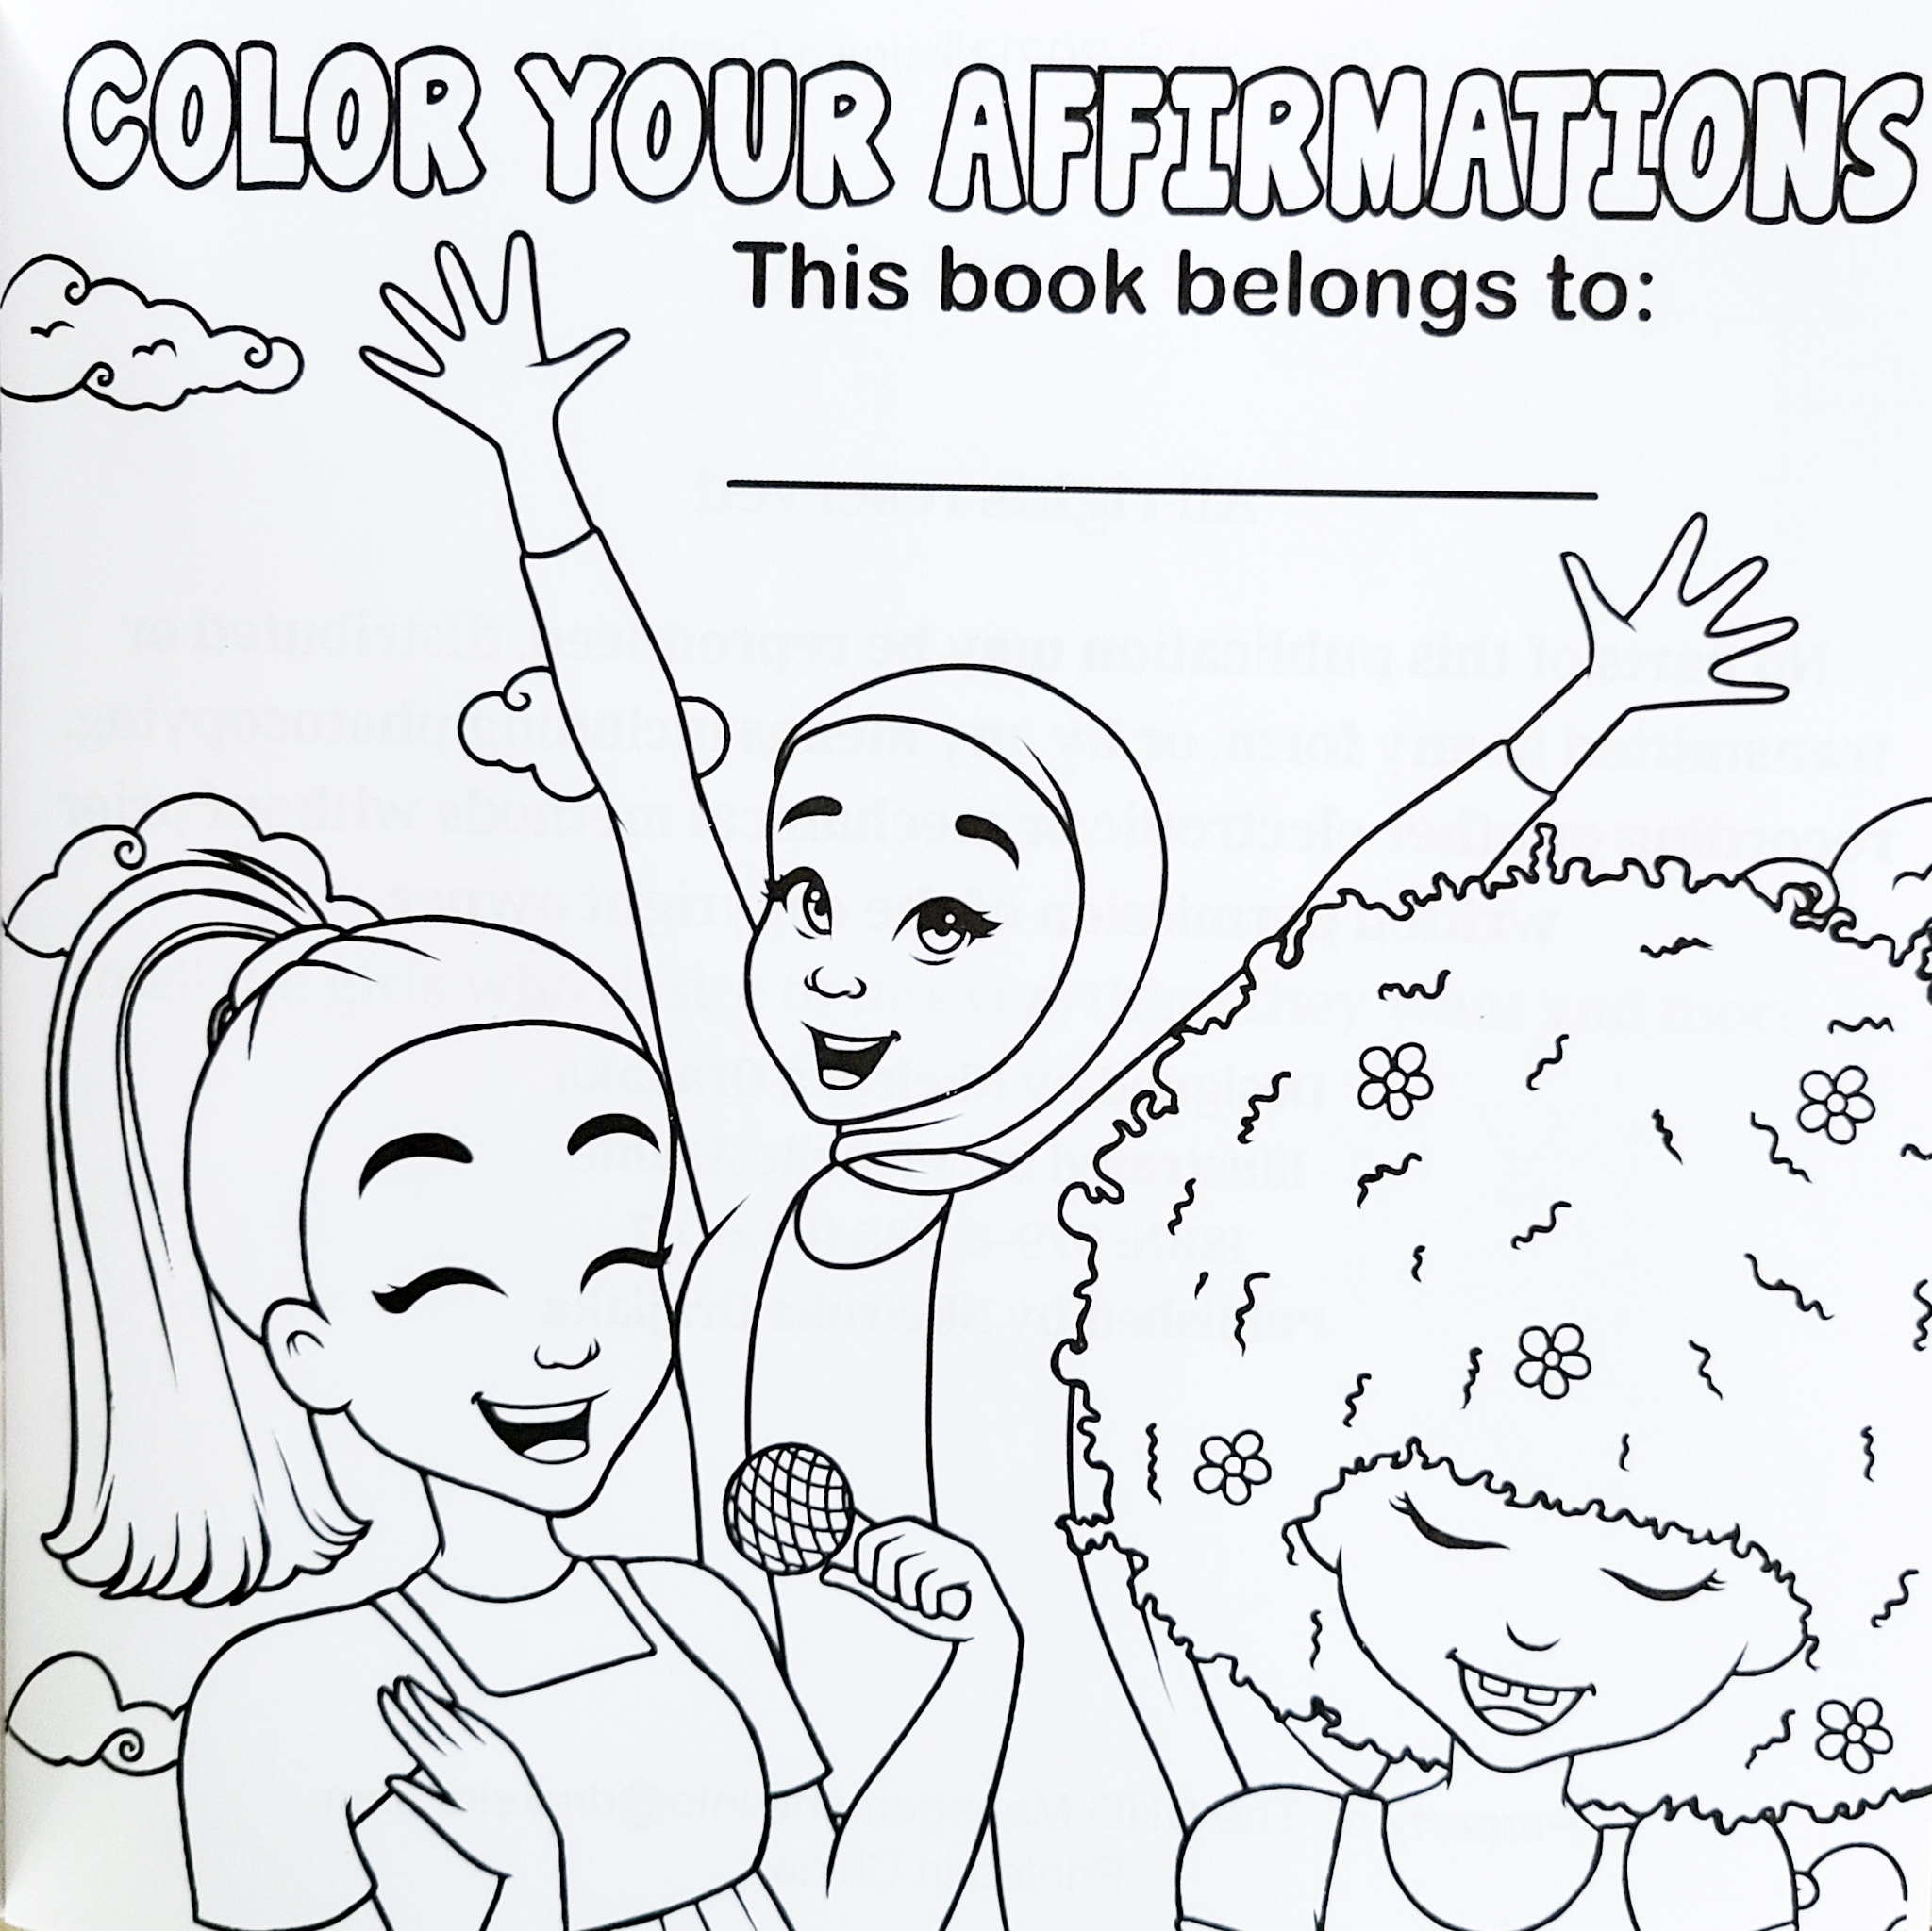 I am Beautiful Affirmation Coloring and Journaling Book